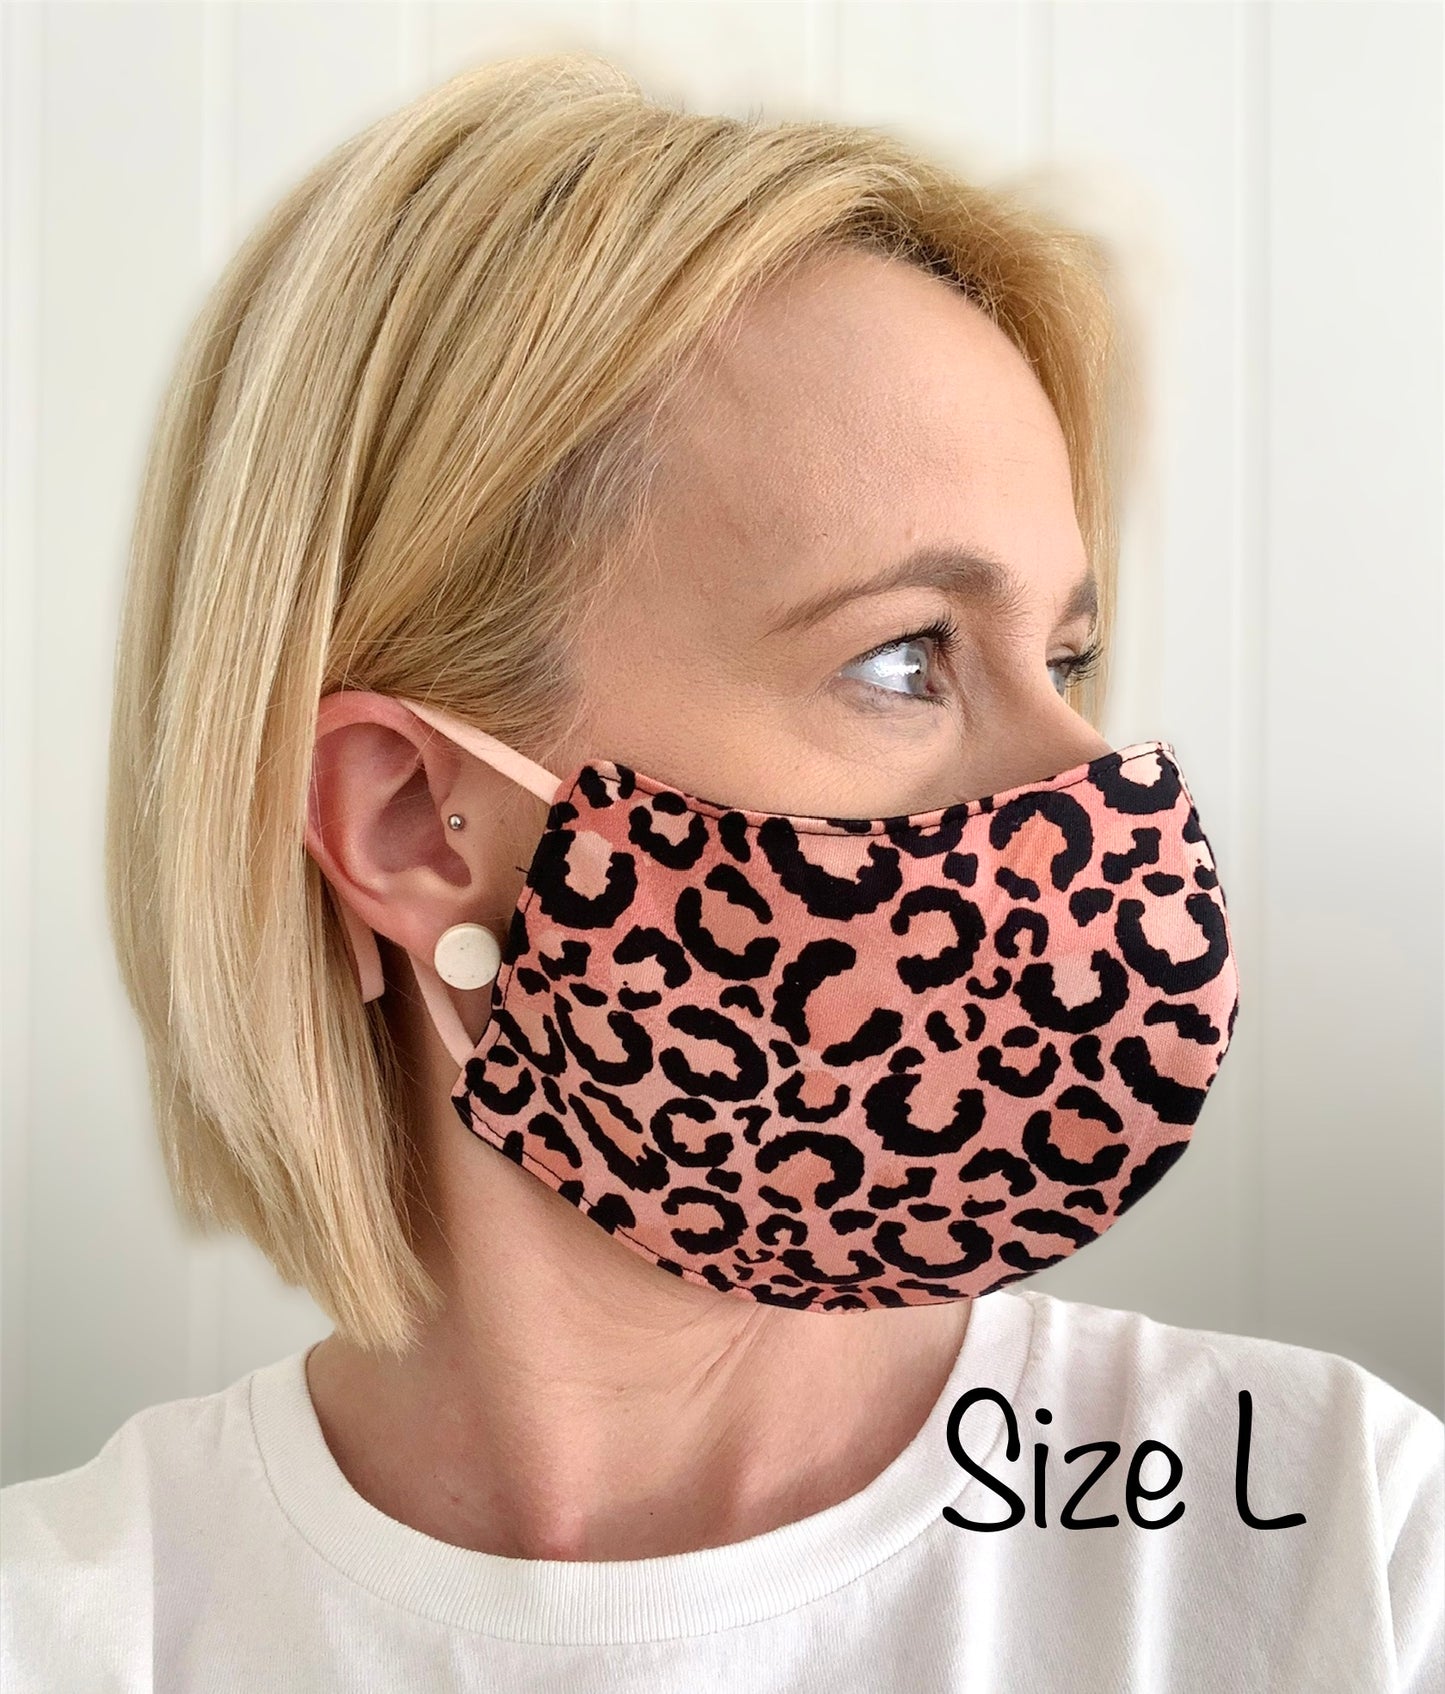 Blue Floral Pink Flower Cotton 3 Layer Face Covering Mask